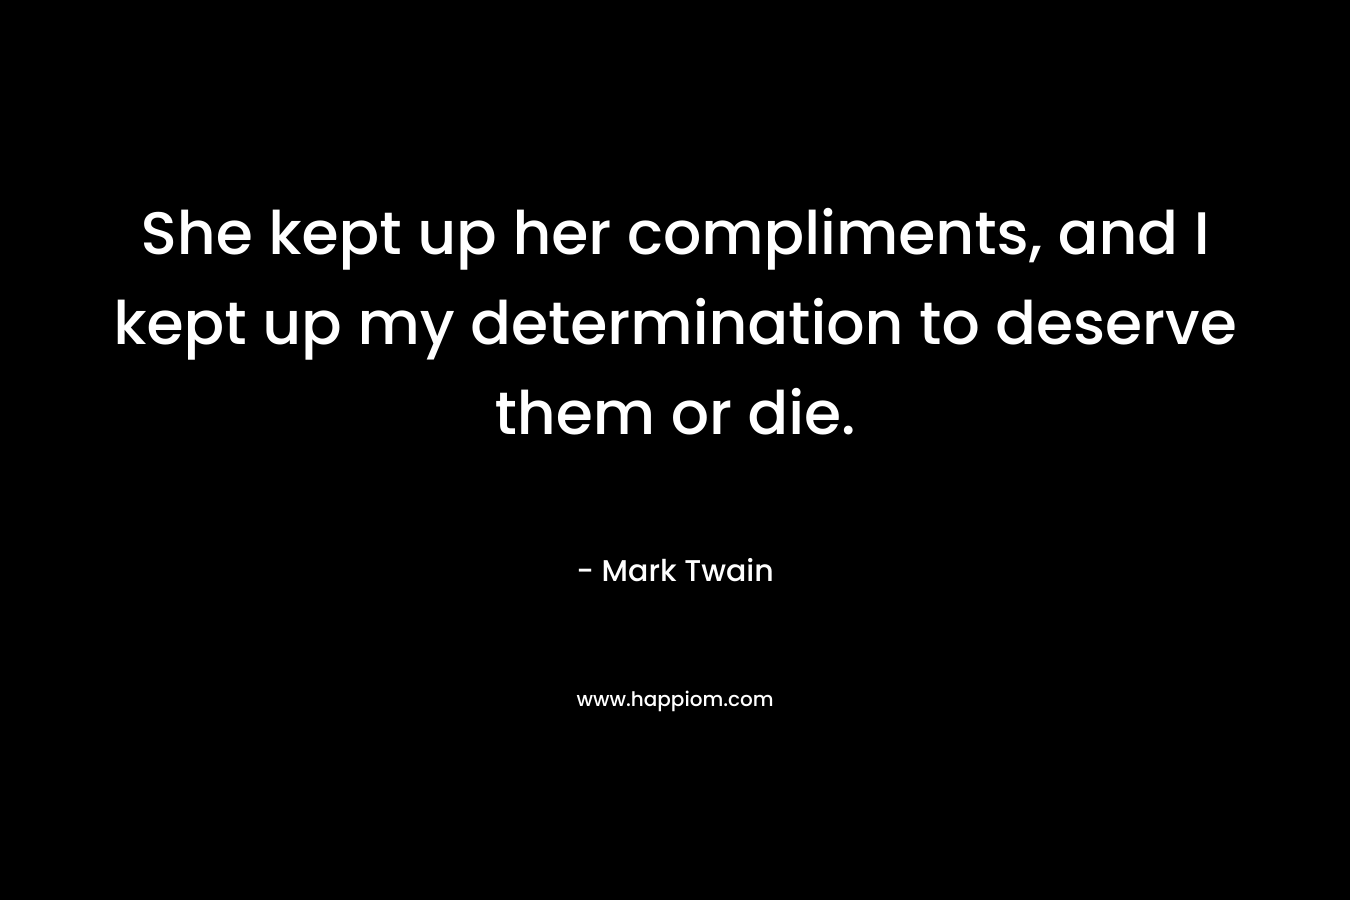 She kept up her compliments, and I kept up my determination to deserve them or die. – Mark Twain